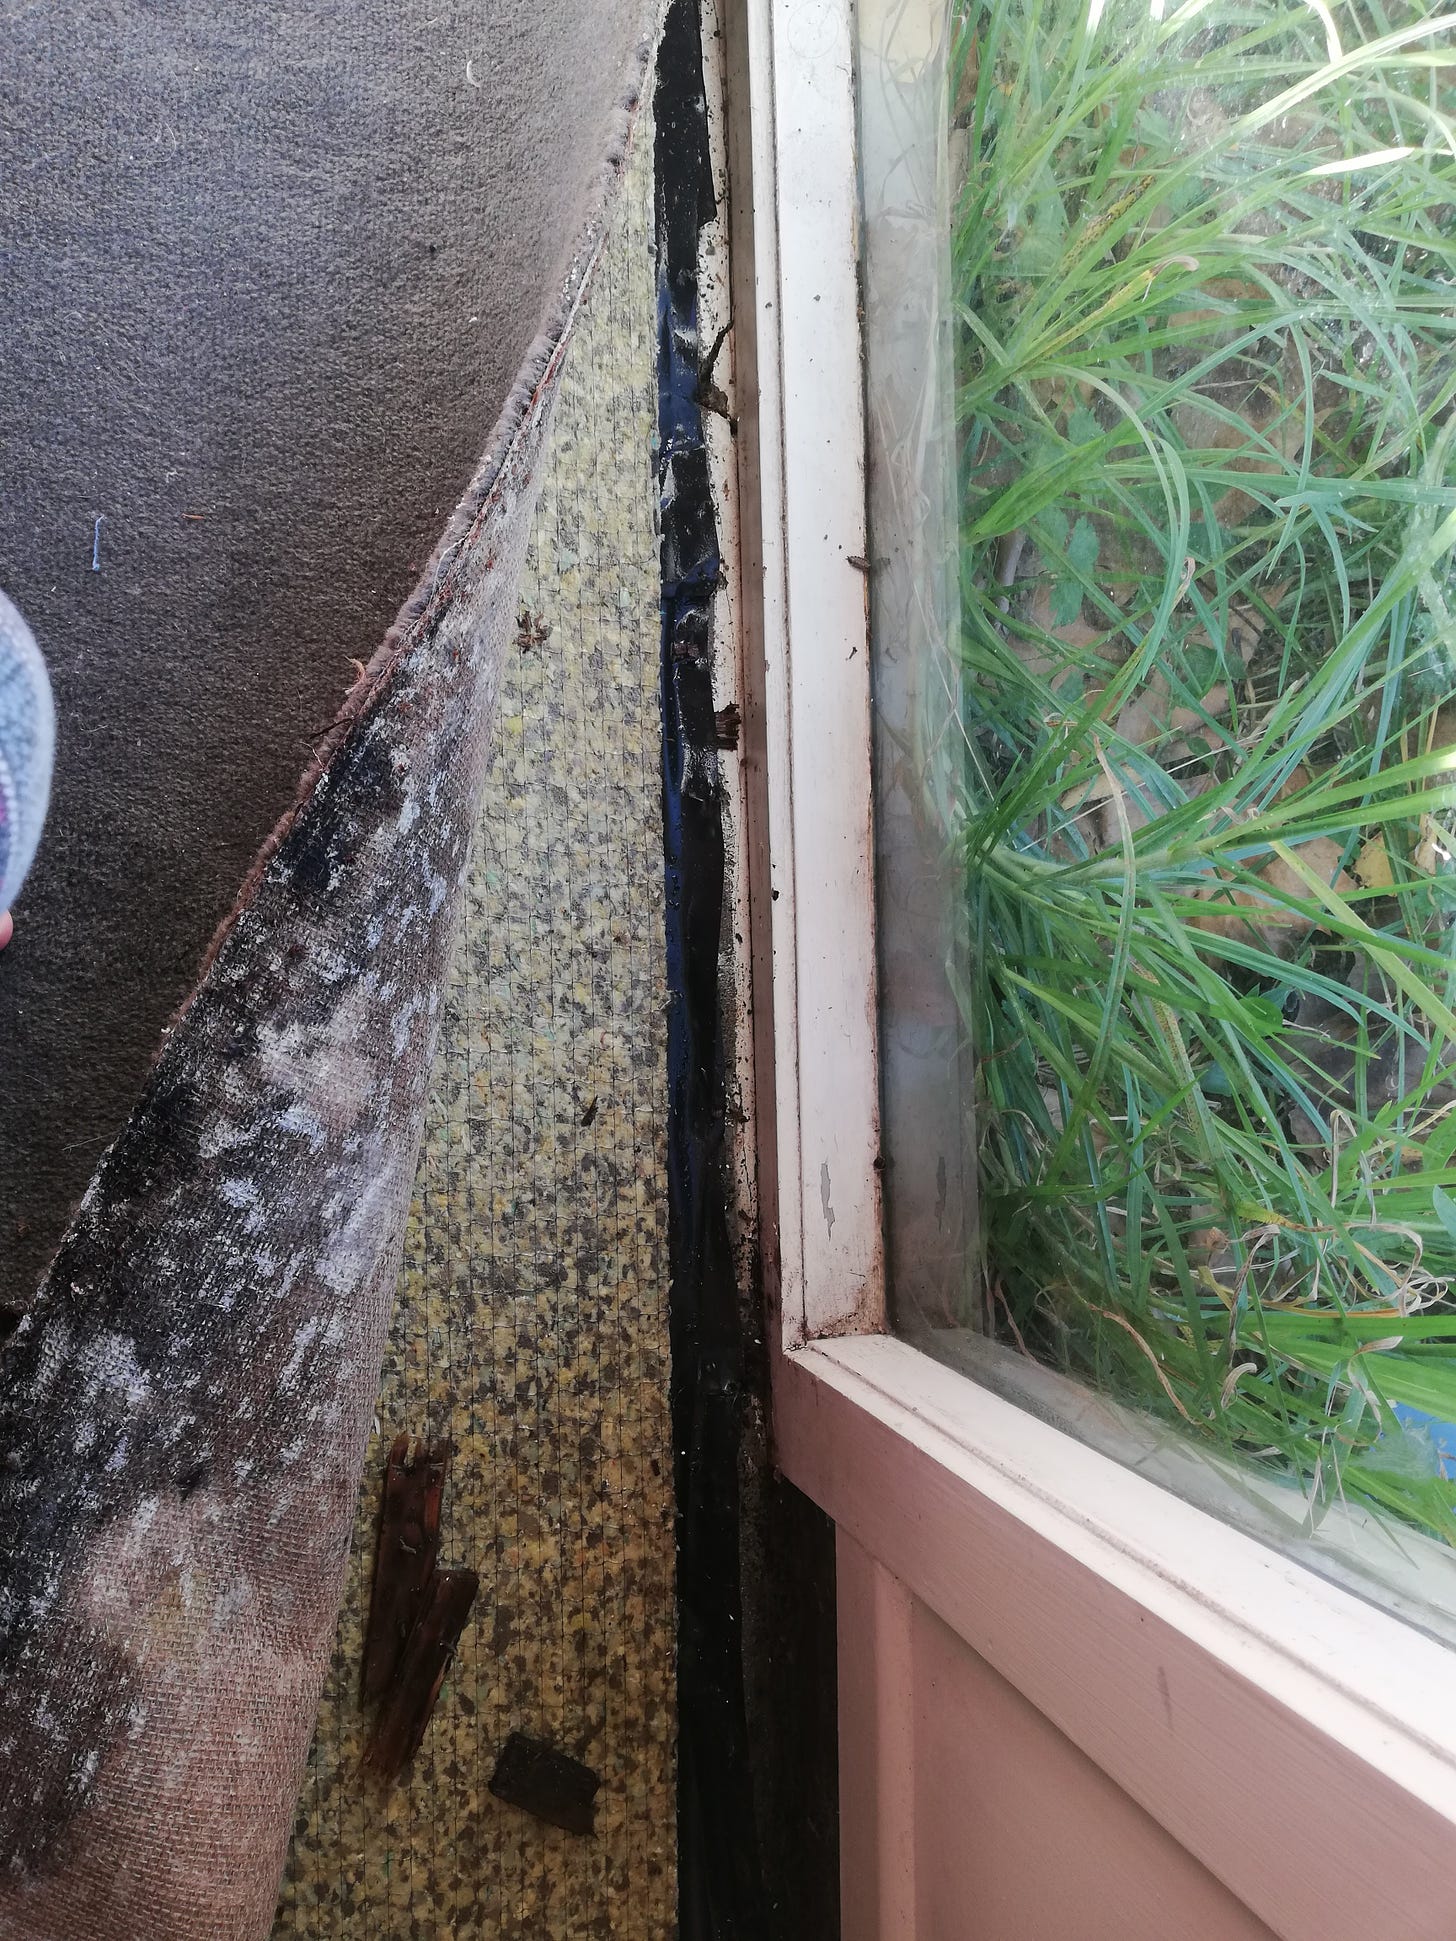 Carpet pulled up showing mould on the bottom and cracked holey floor and windowframe